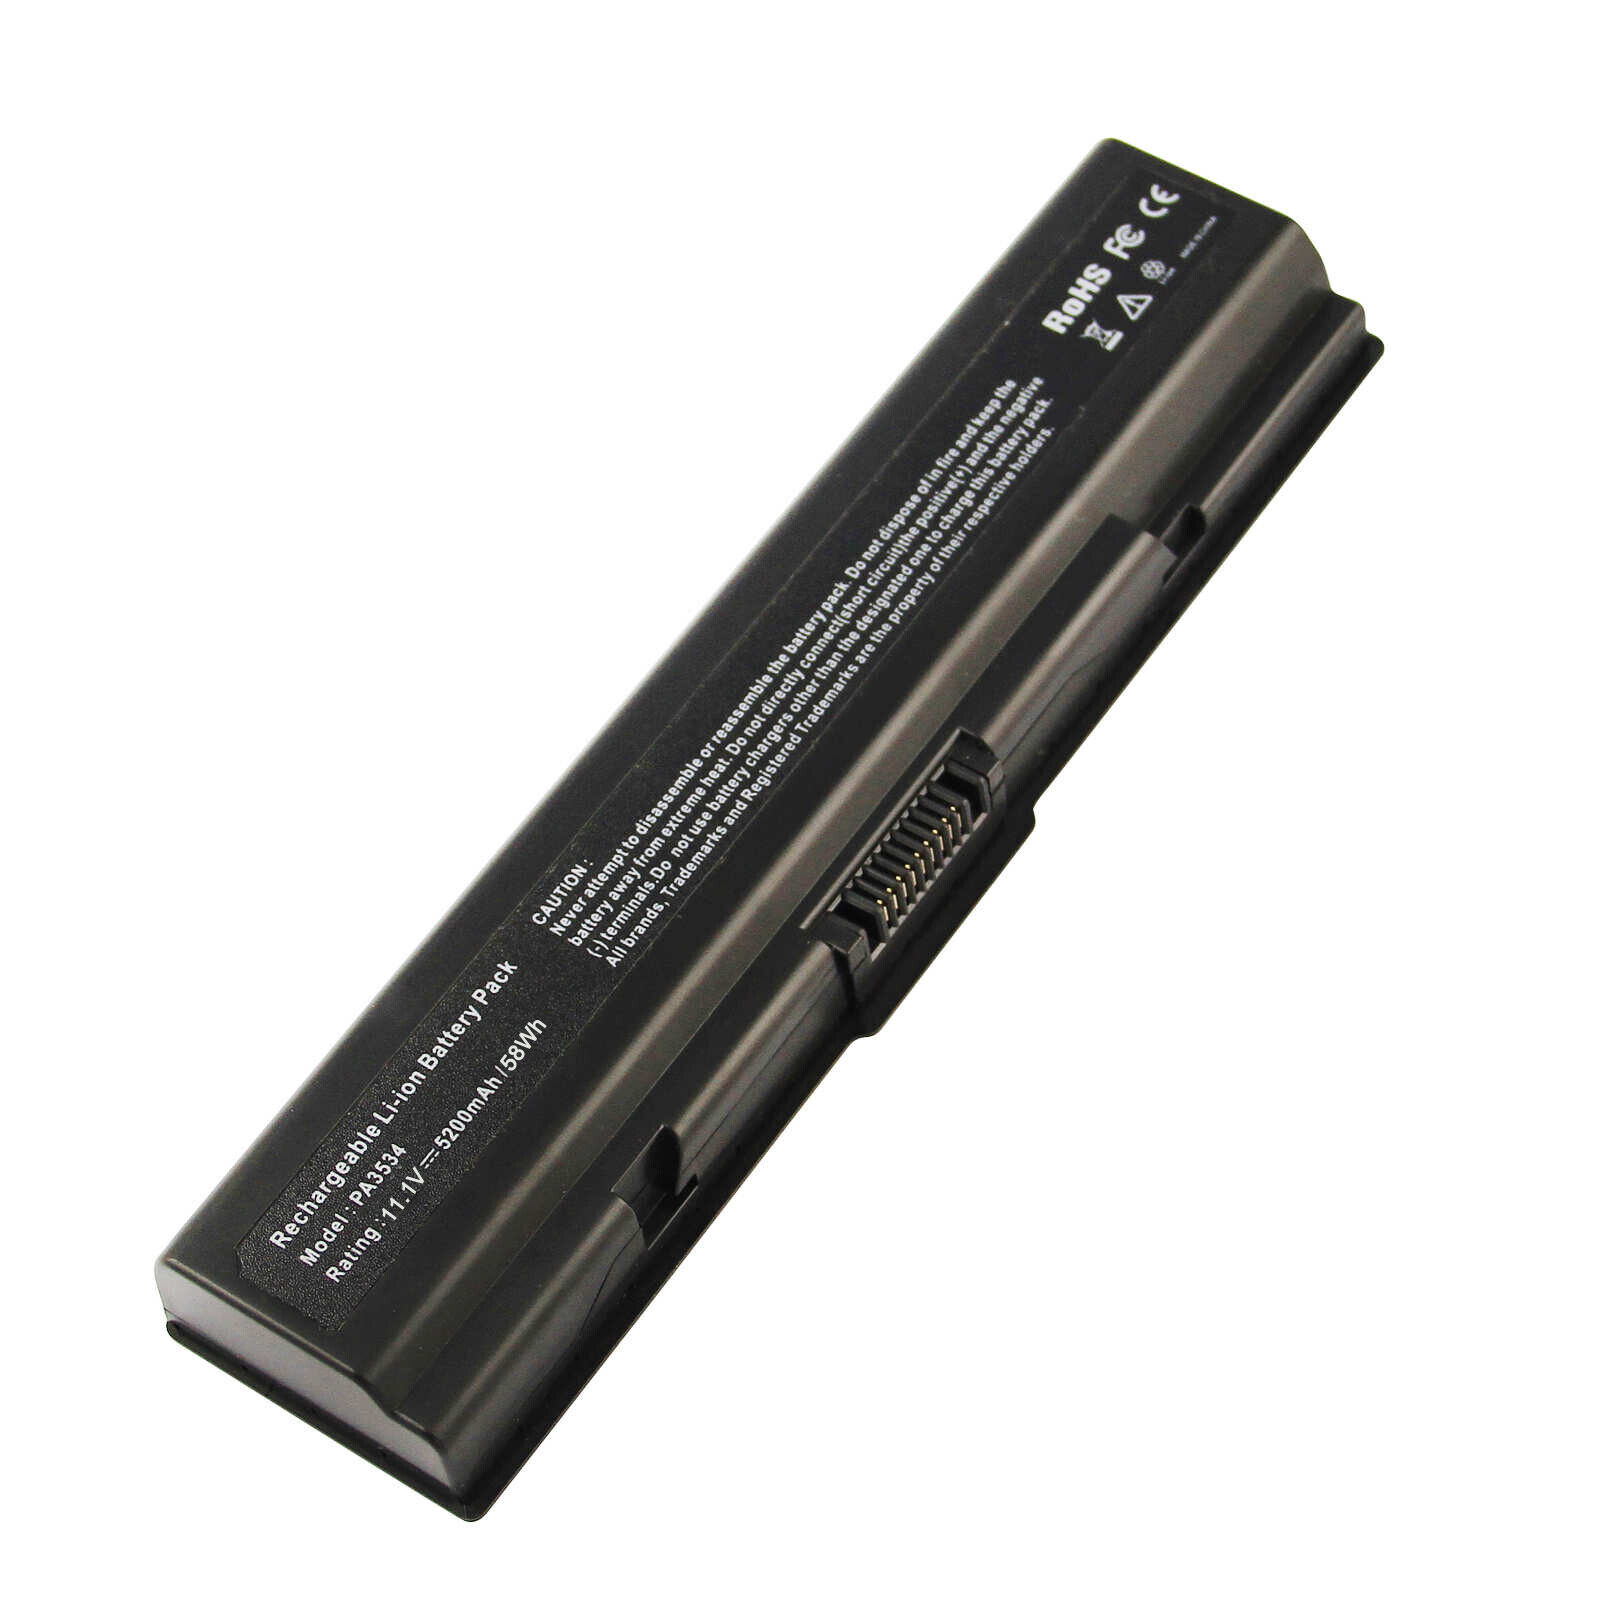 Battery for Toshiba Satellite A305D L305D-S5934 A505-S6995 L305-S5896 L305-S5876